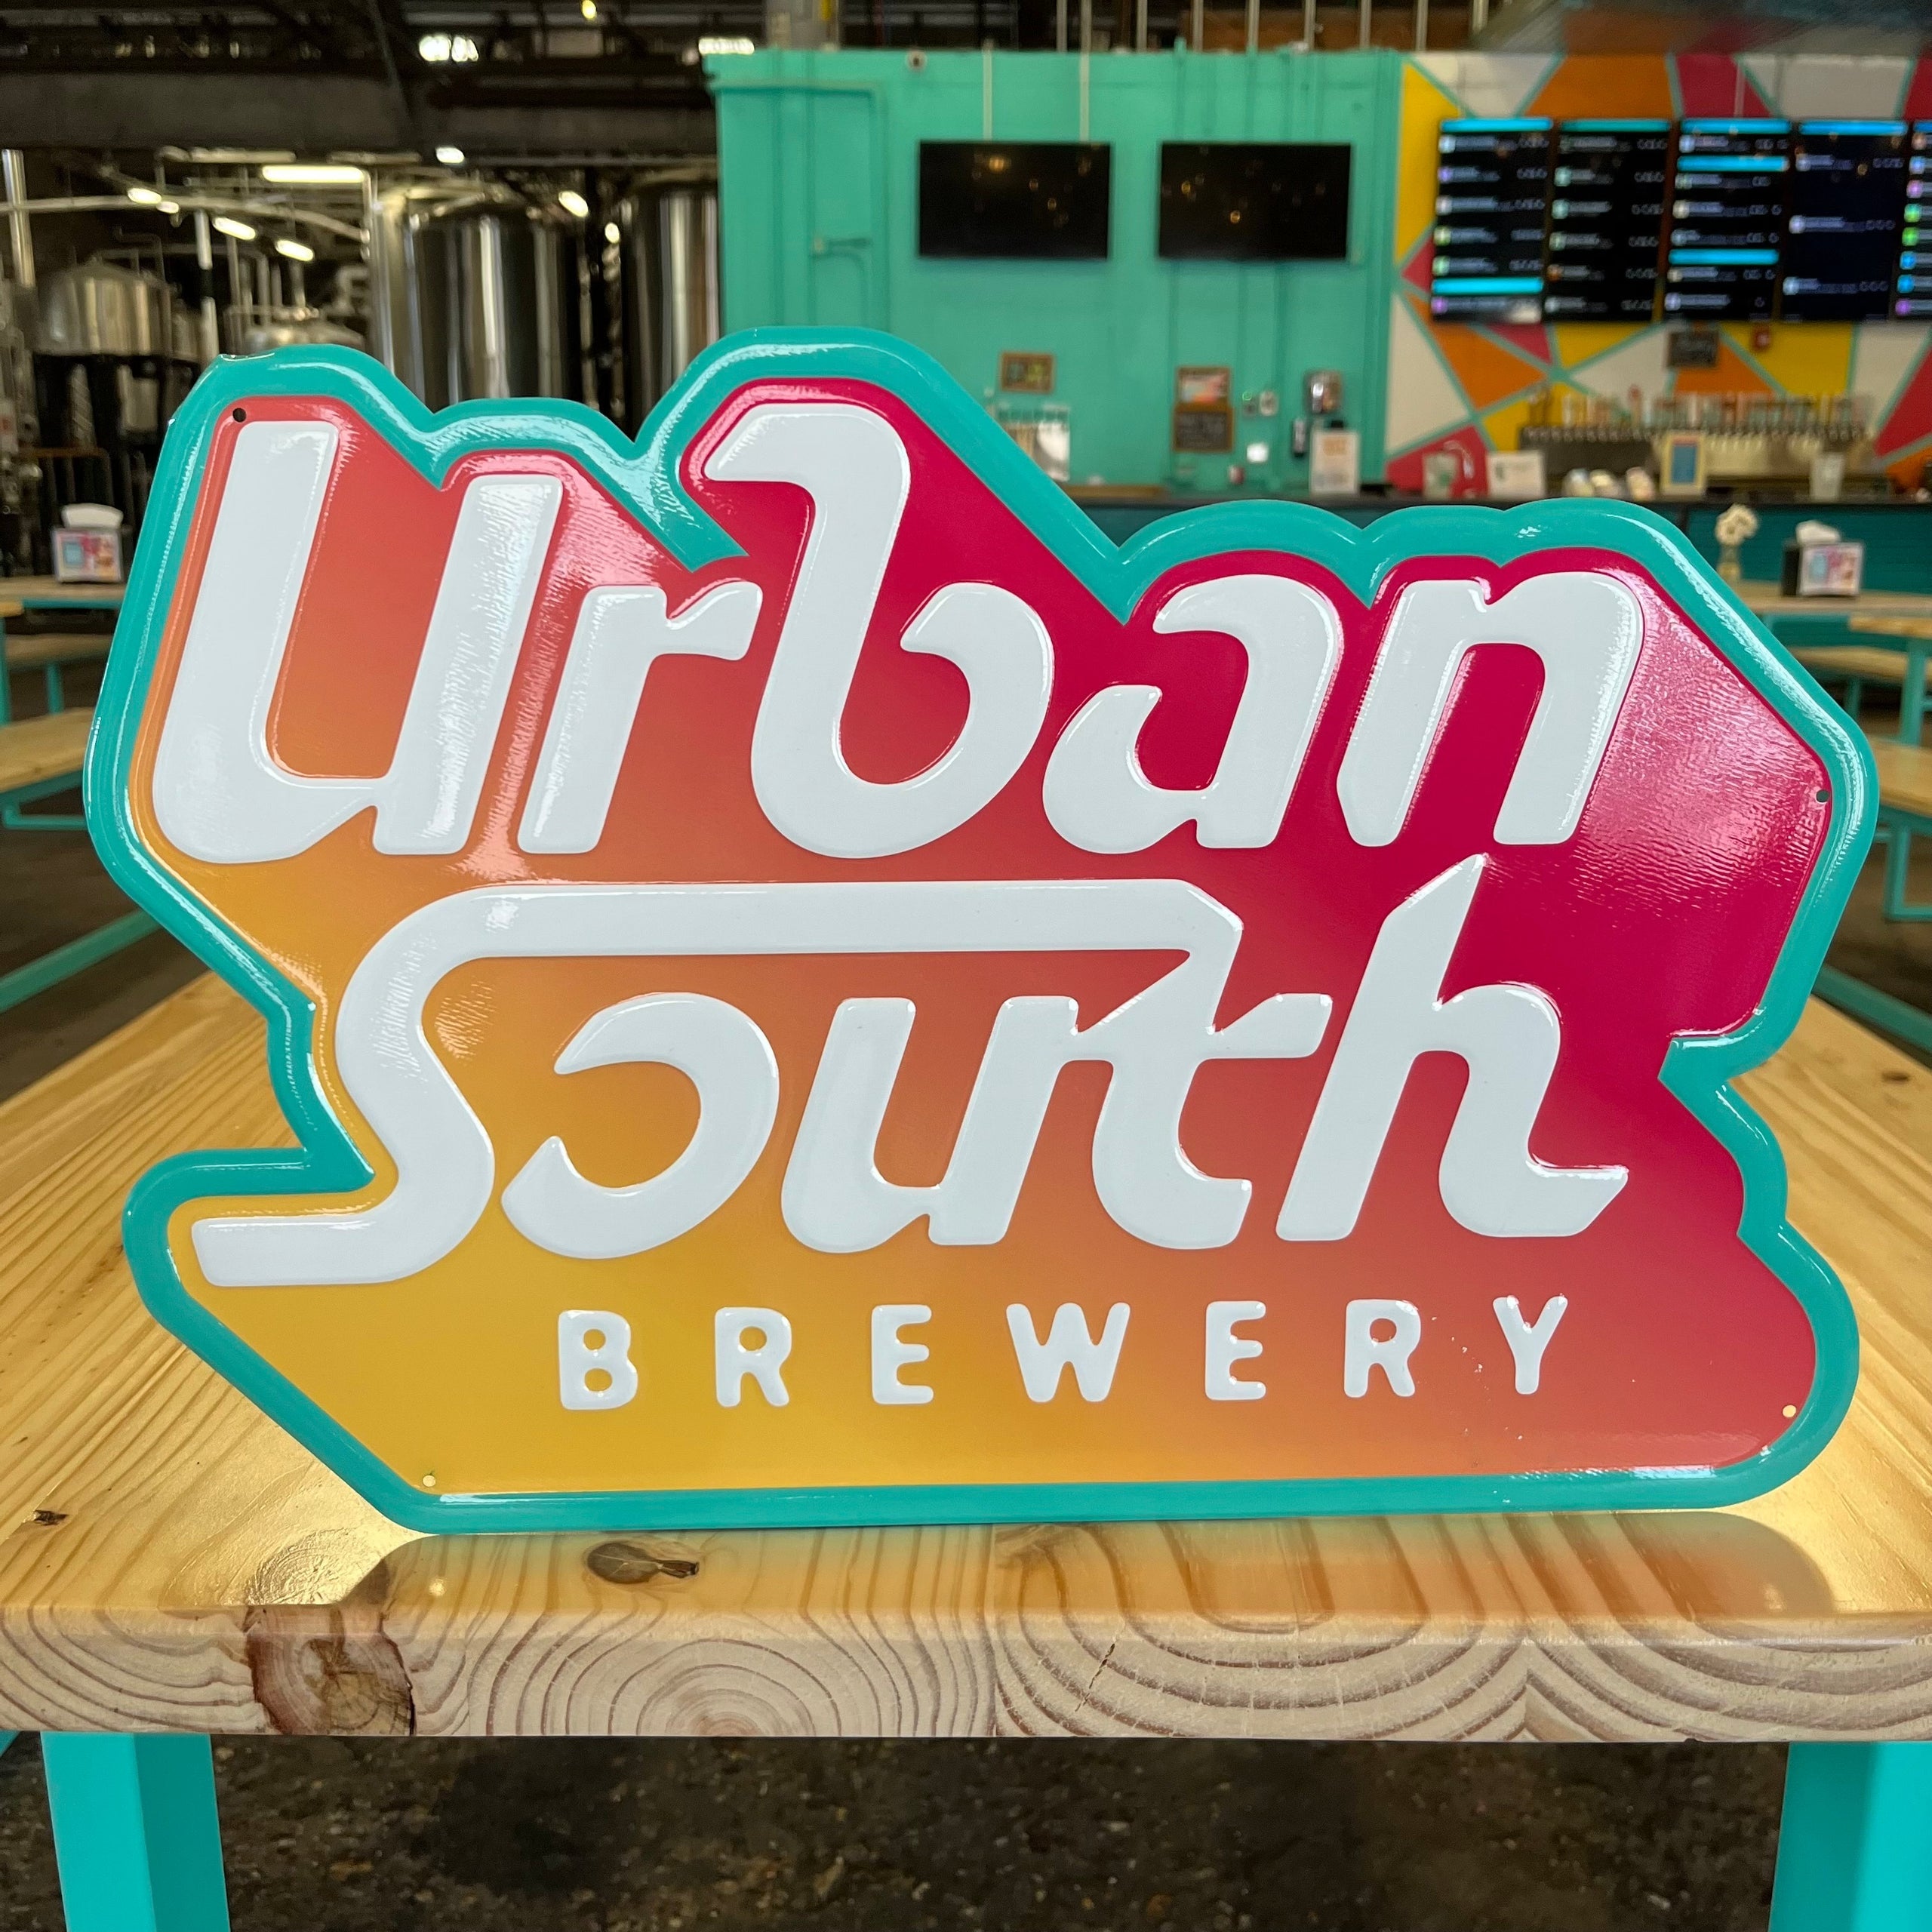 Paradise Park from Urban South Brewery - Available near you - TapHunter